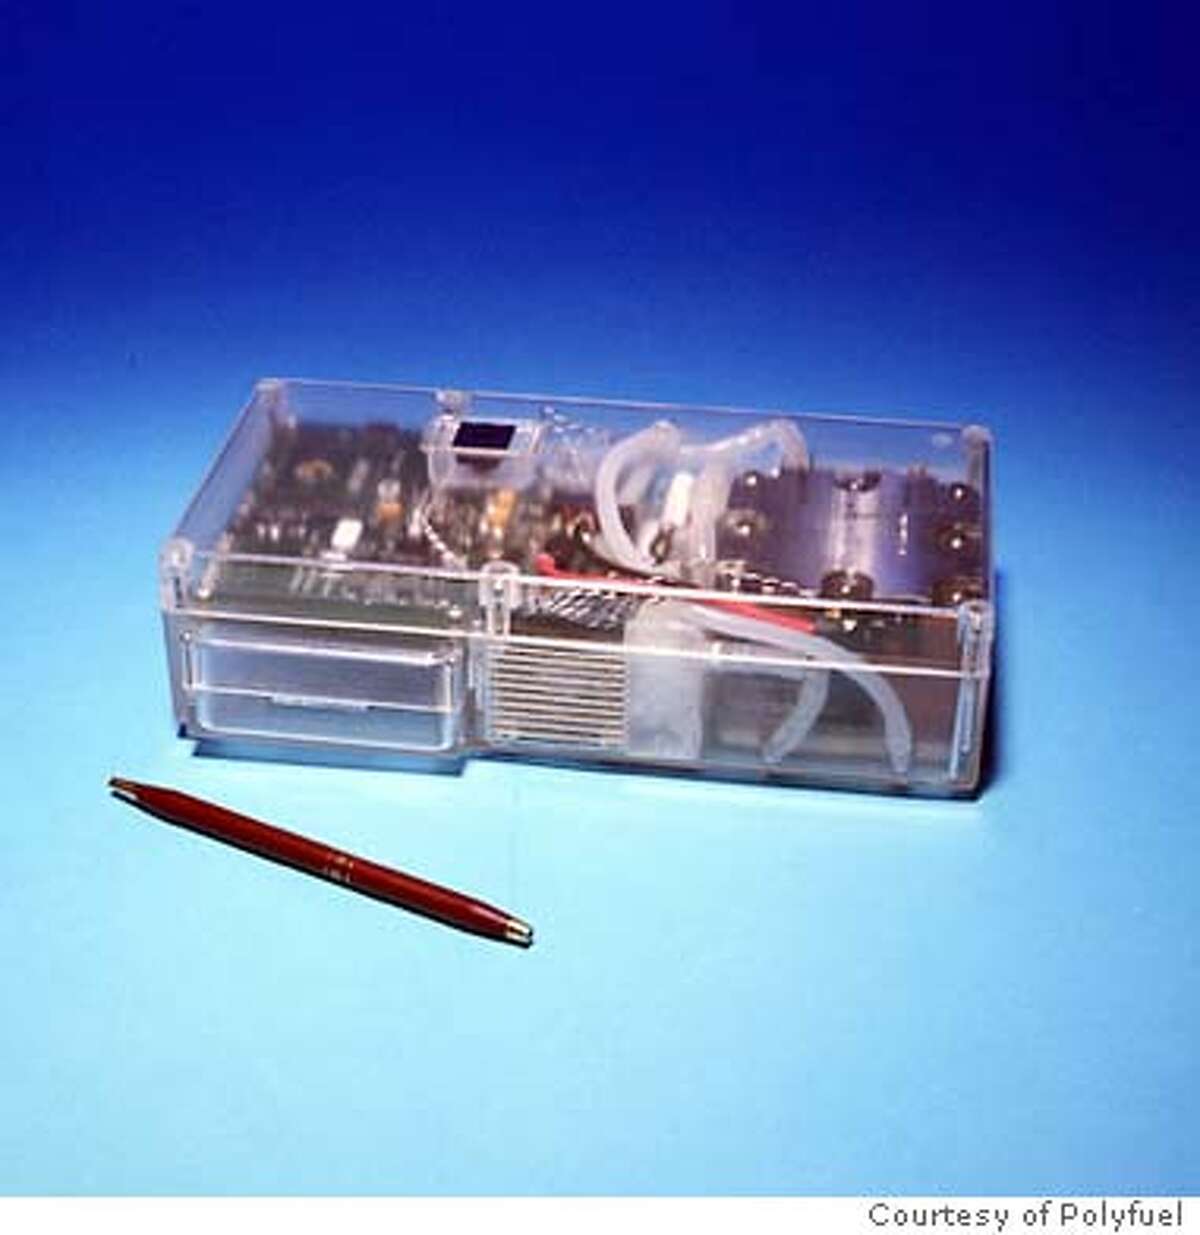 For FUELCELL01, Business, Tong ; A working prototype of a direct methanol fuel cell system that PolyFuel developed for a laptop computer. Photo courtesy of PolyFuel ; on 8/11/03 in . / Courtesy of Polyfuel